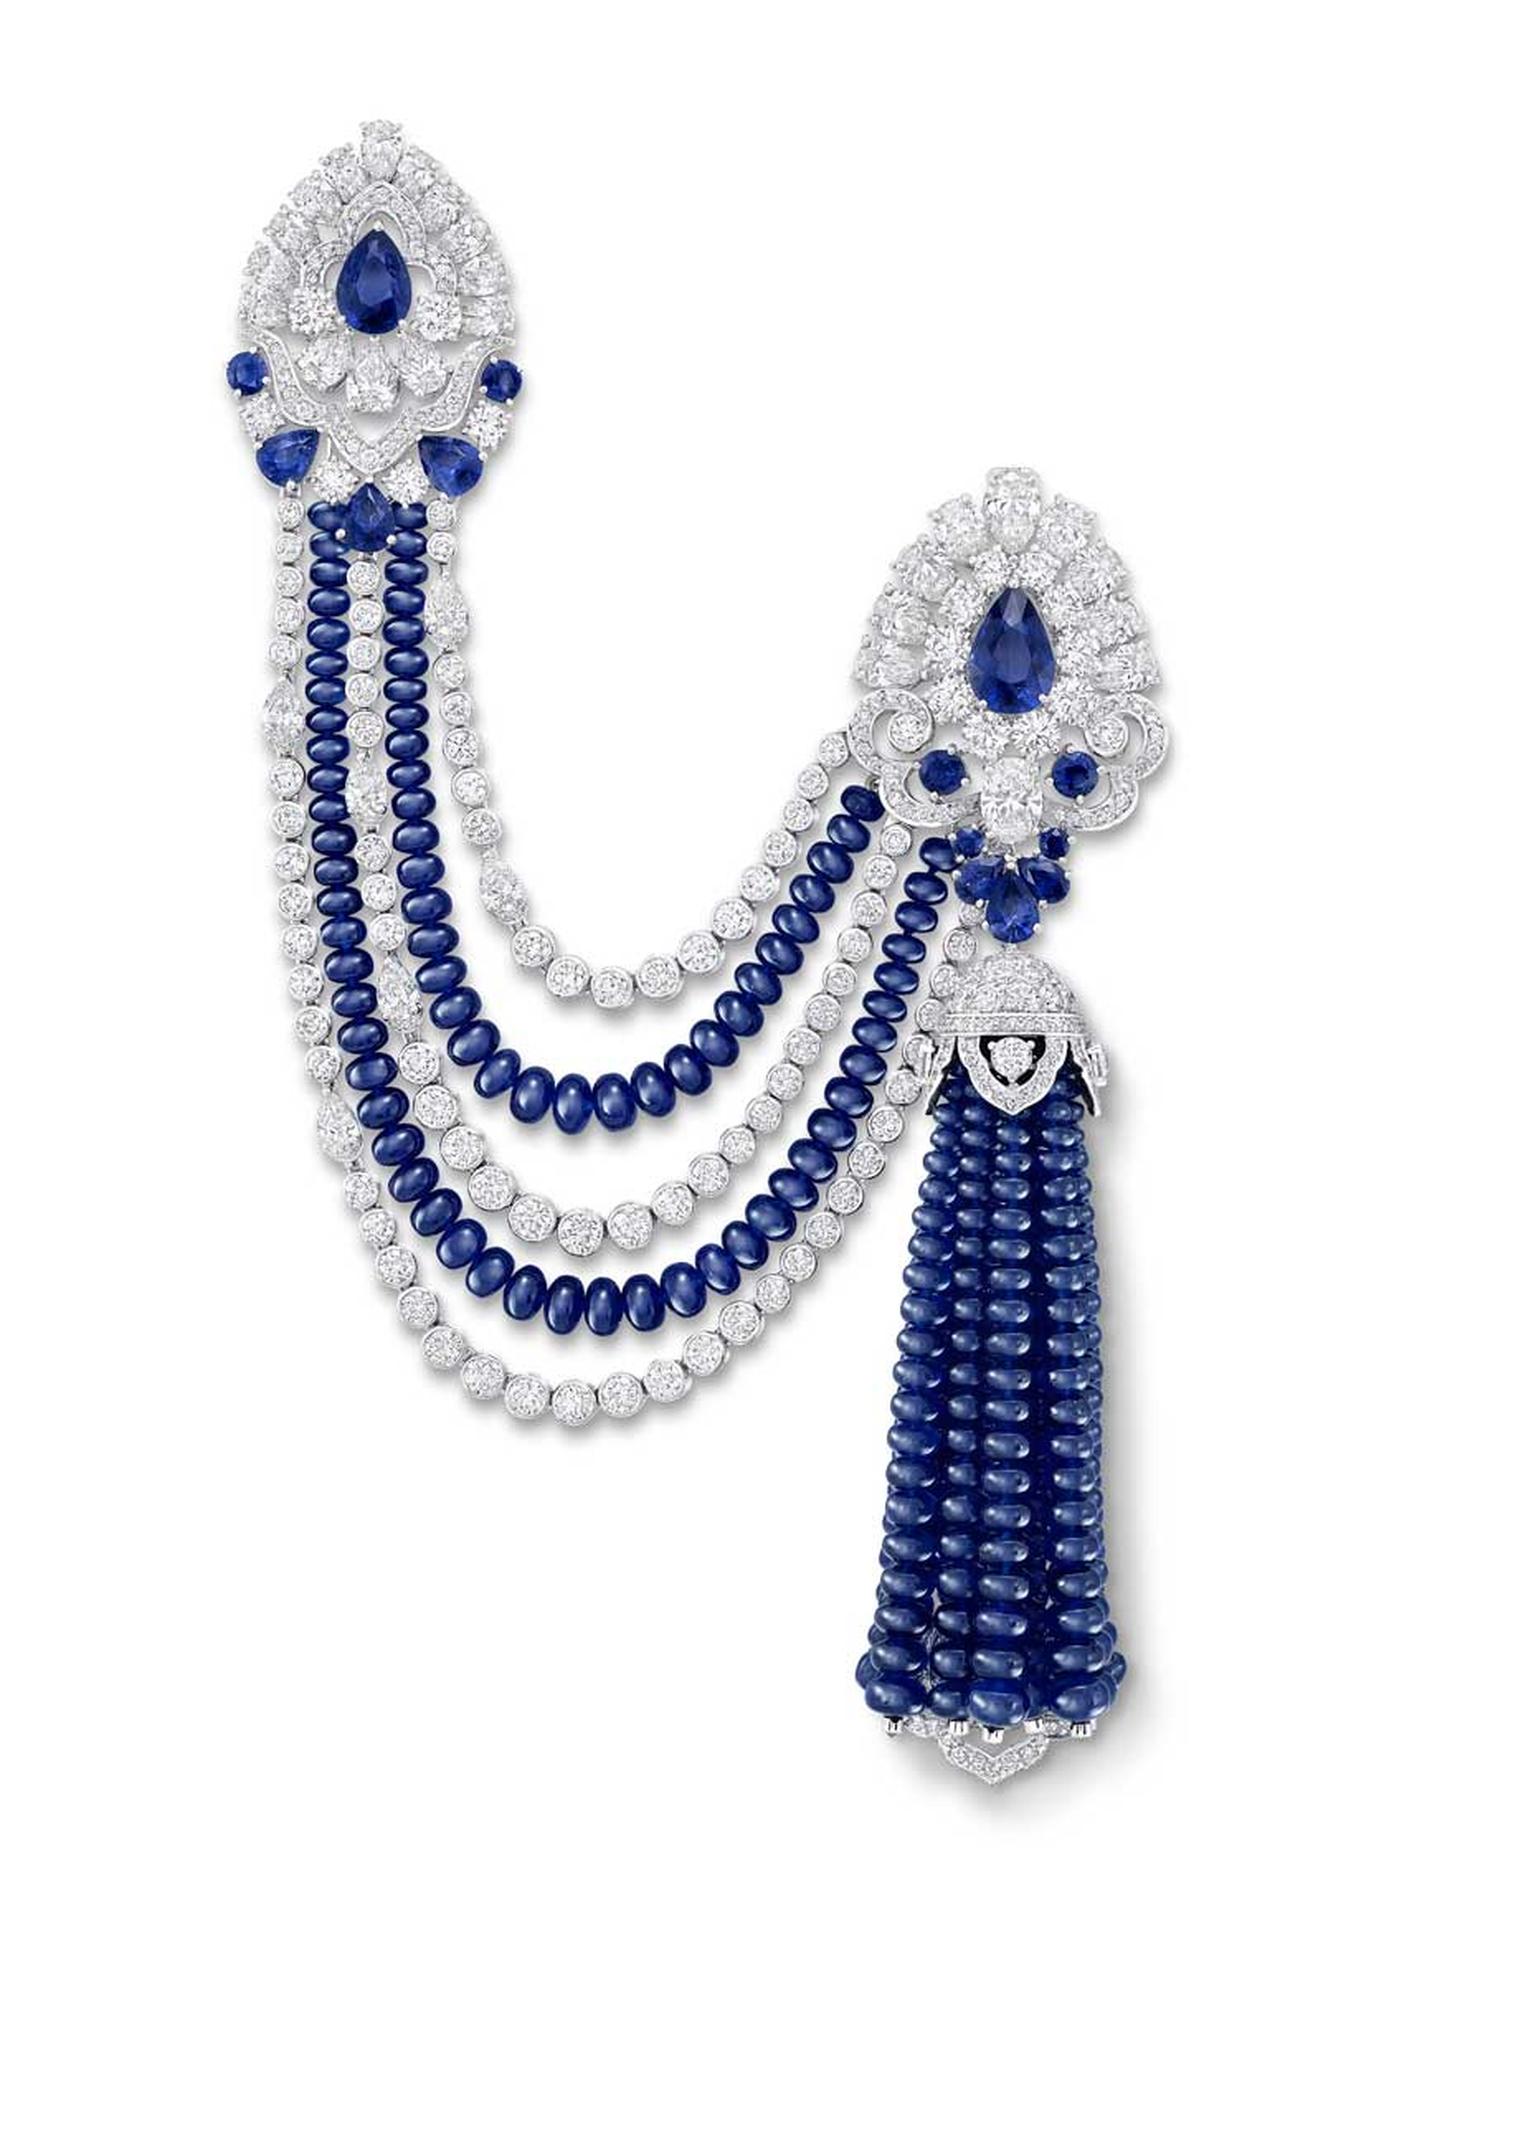 More than 330ct of sapphires and 40ct of diamonds have been used in Graff's transformable brooch/secret watch.